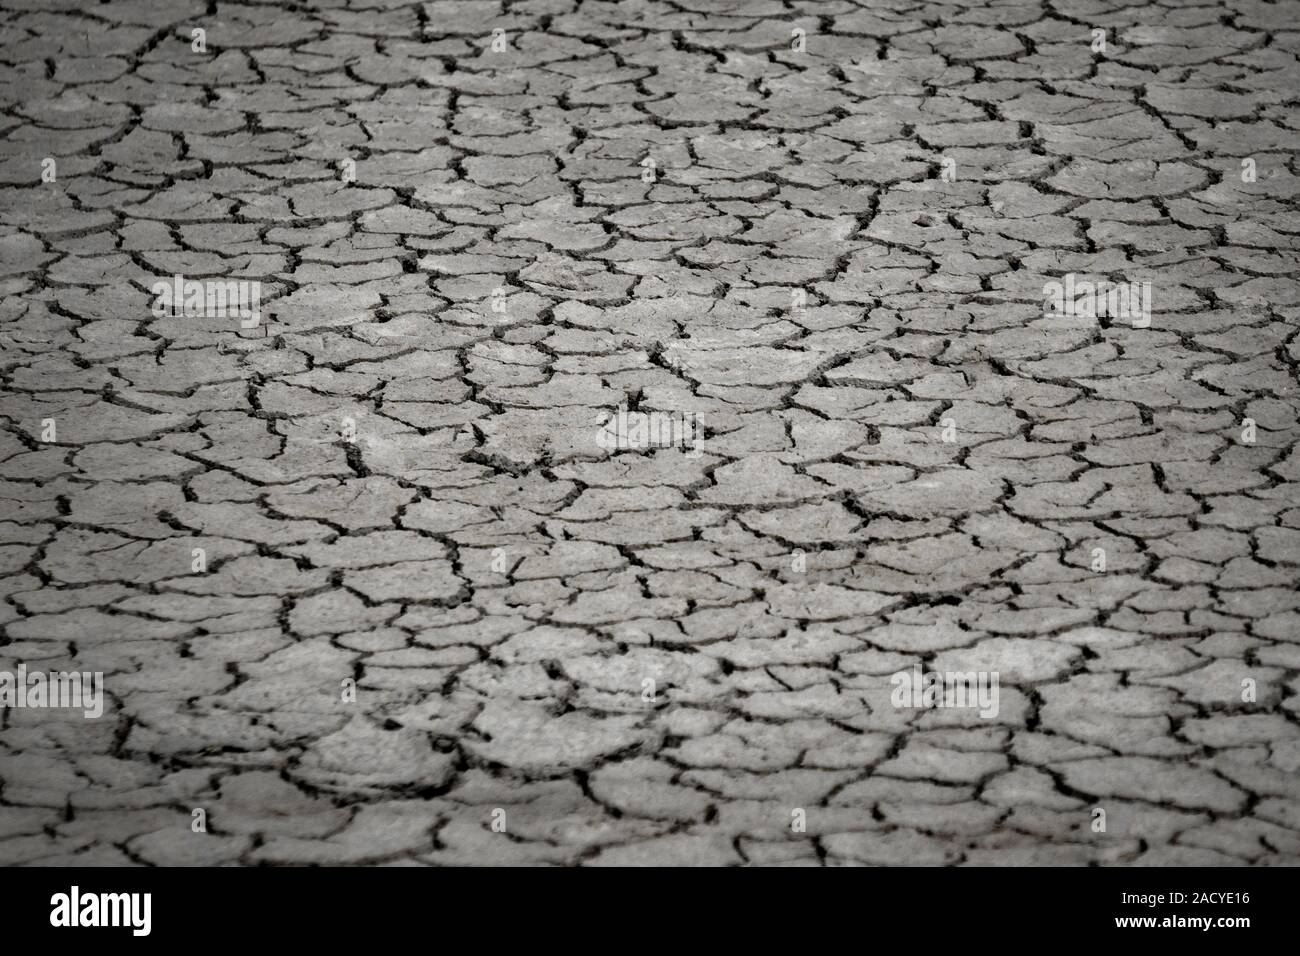 Blackground of Dry land or soil during the dry season. Stock Photo